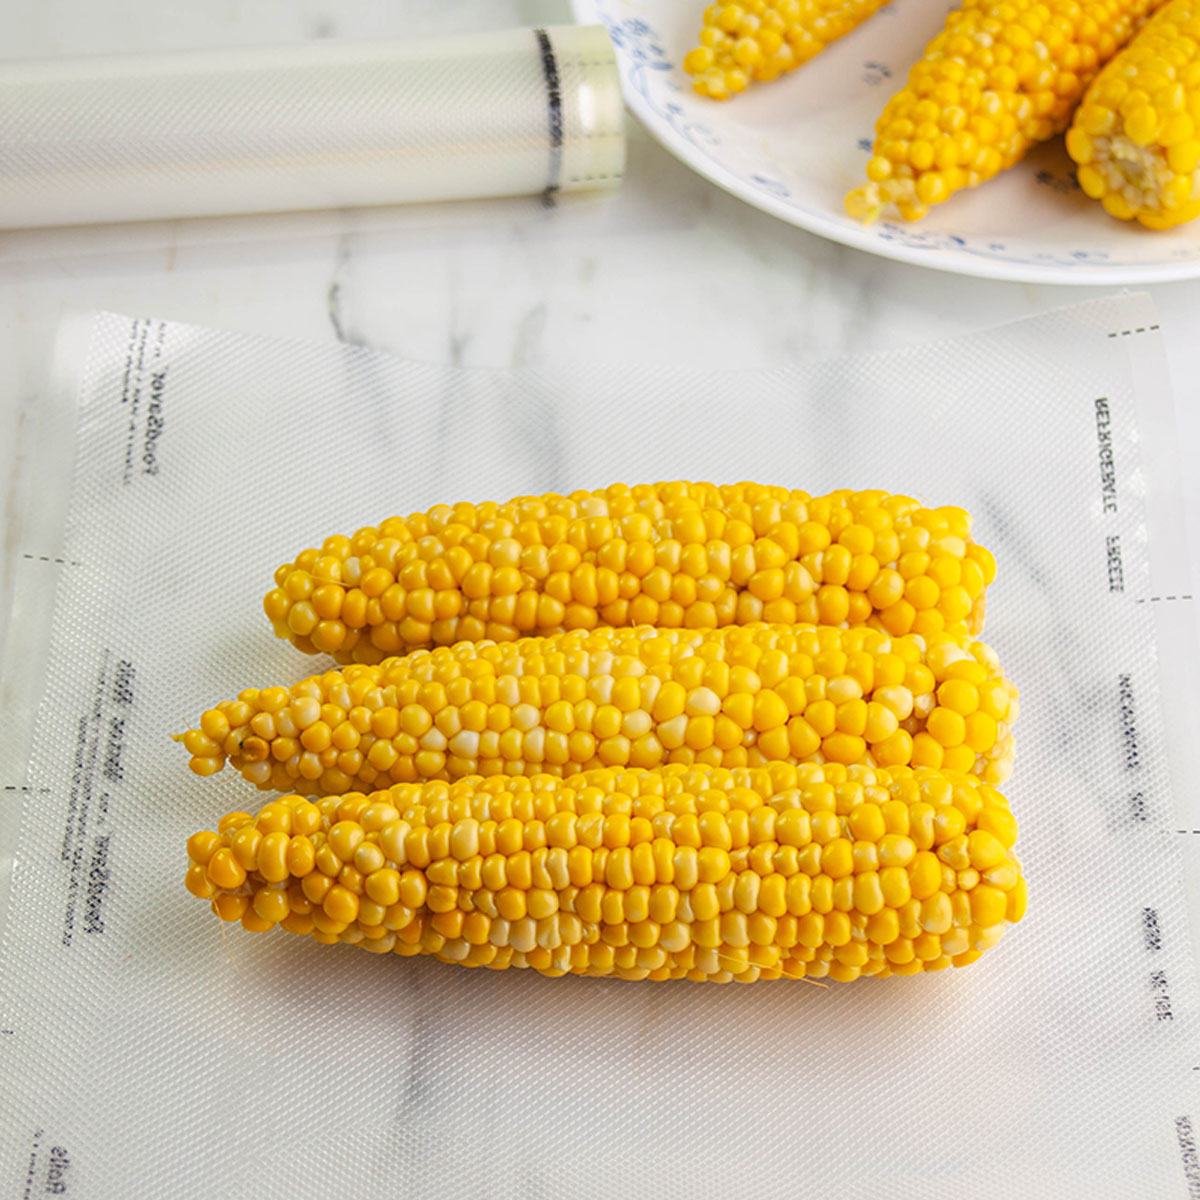 You can store several cobs of corn in one freezer bag. Get as much air out as possible, seal the bag, label, date, and put in your freezer at 0°F or lower.